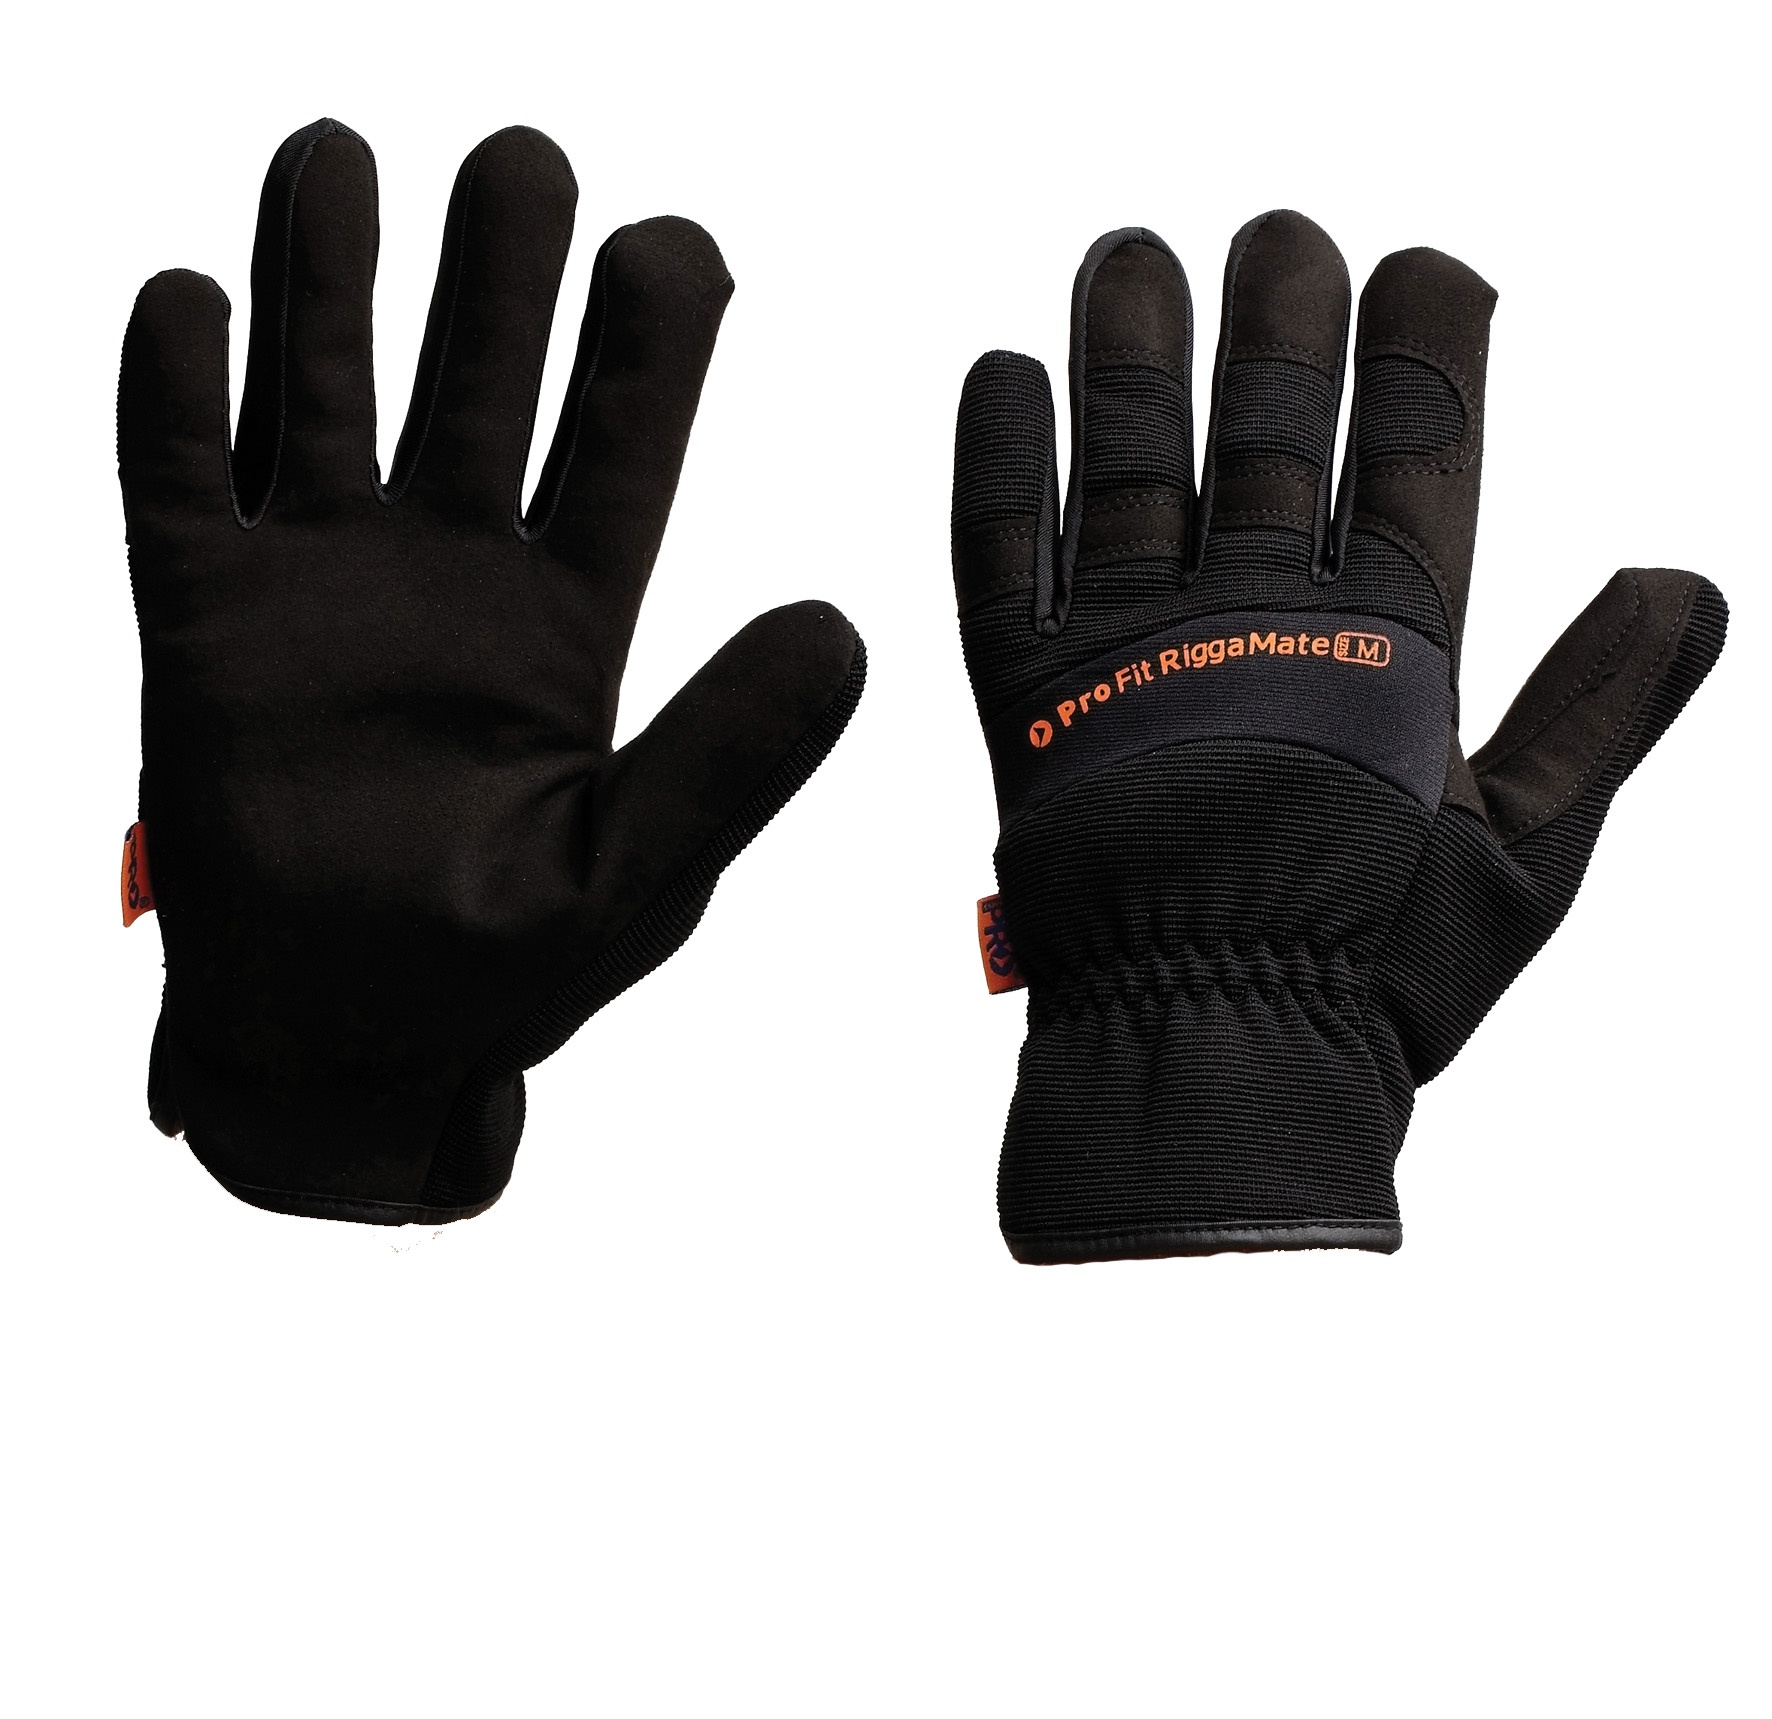 Dirty Rigger Gloves For Sale - Stage Lighting Services